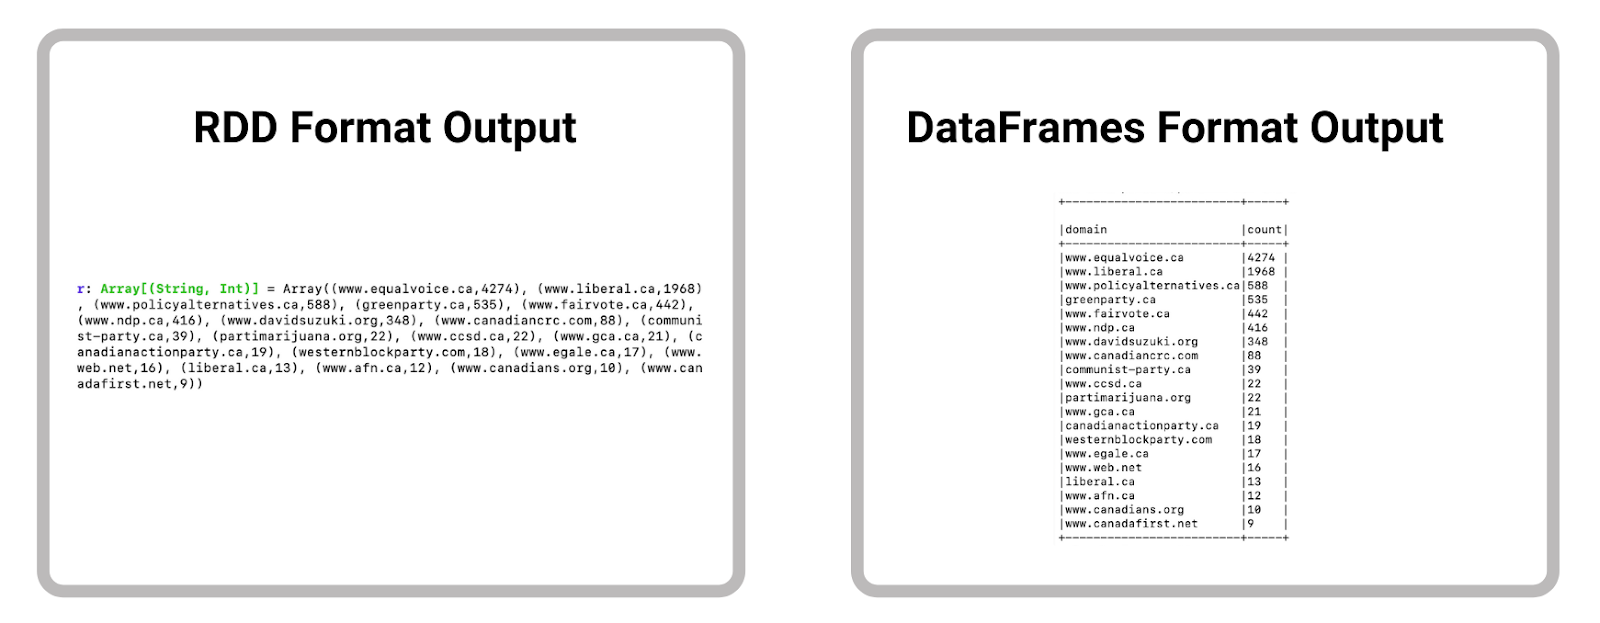 Comparison between RDD and DataFrame outputs